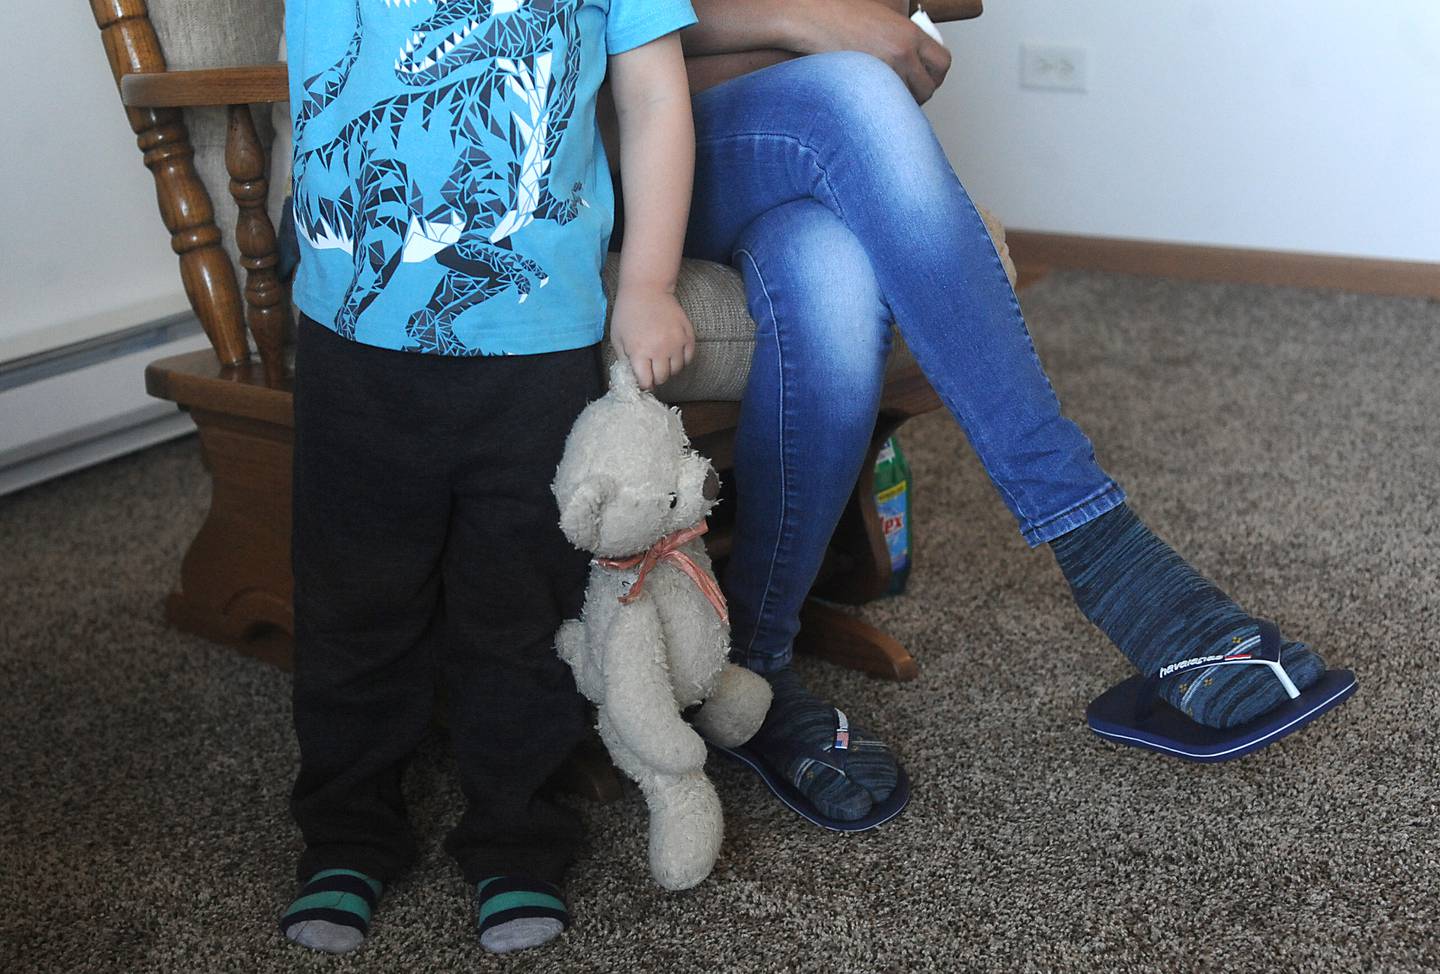 Wilma Alex's son holds a teddy bear as his mom talks about all the help she received after being nearly killed in early March, during an interview Thursday, April 21, 2022, in her apartment in McHenry County. Her husband, Mark Alex, was charged with attempted first-degree murder.